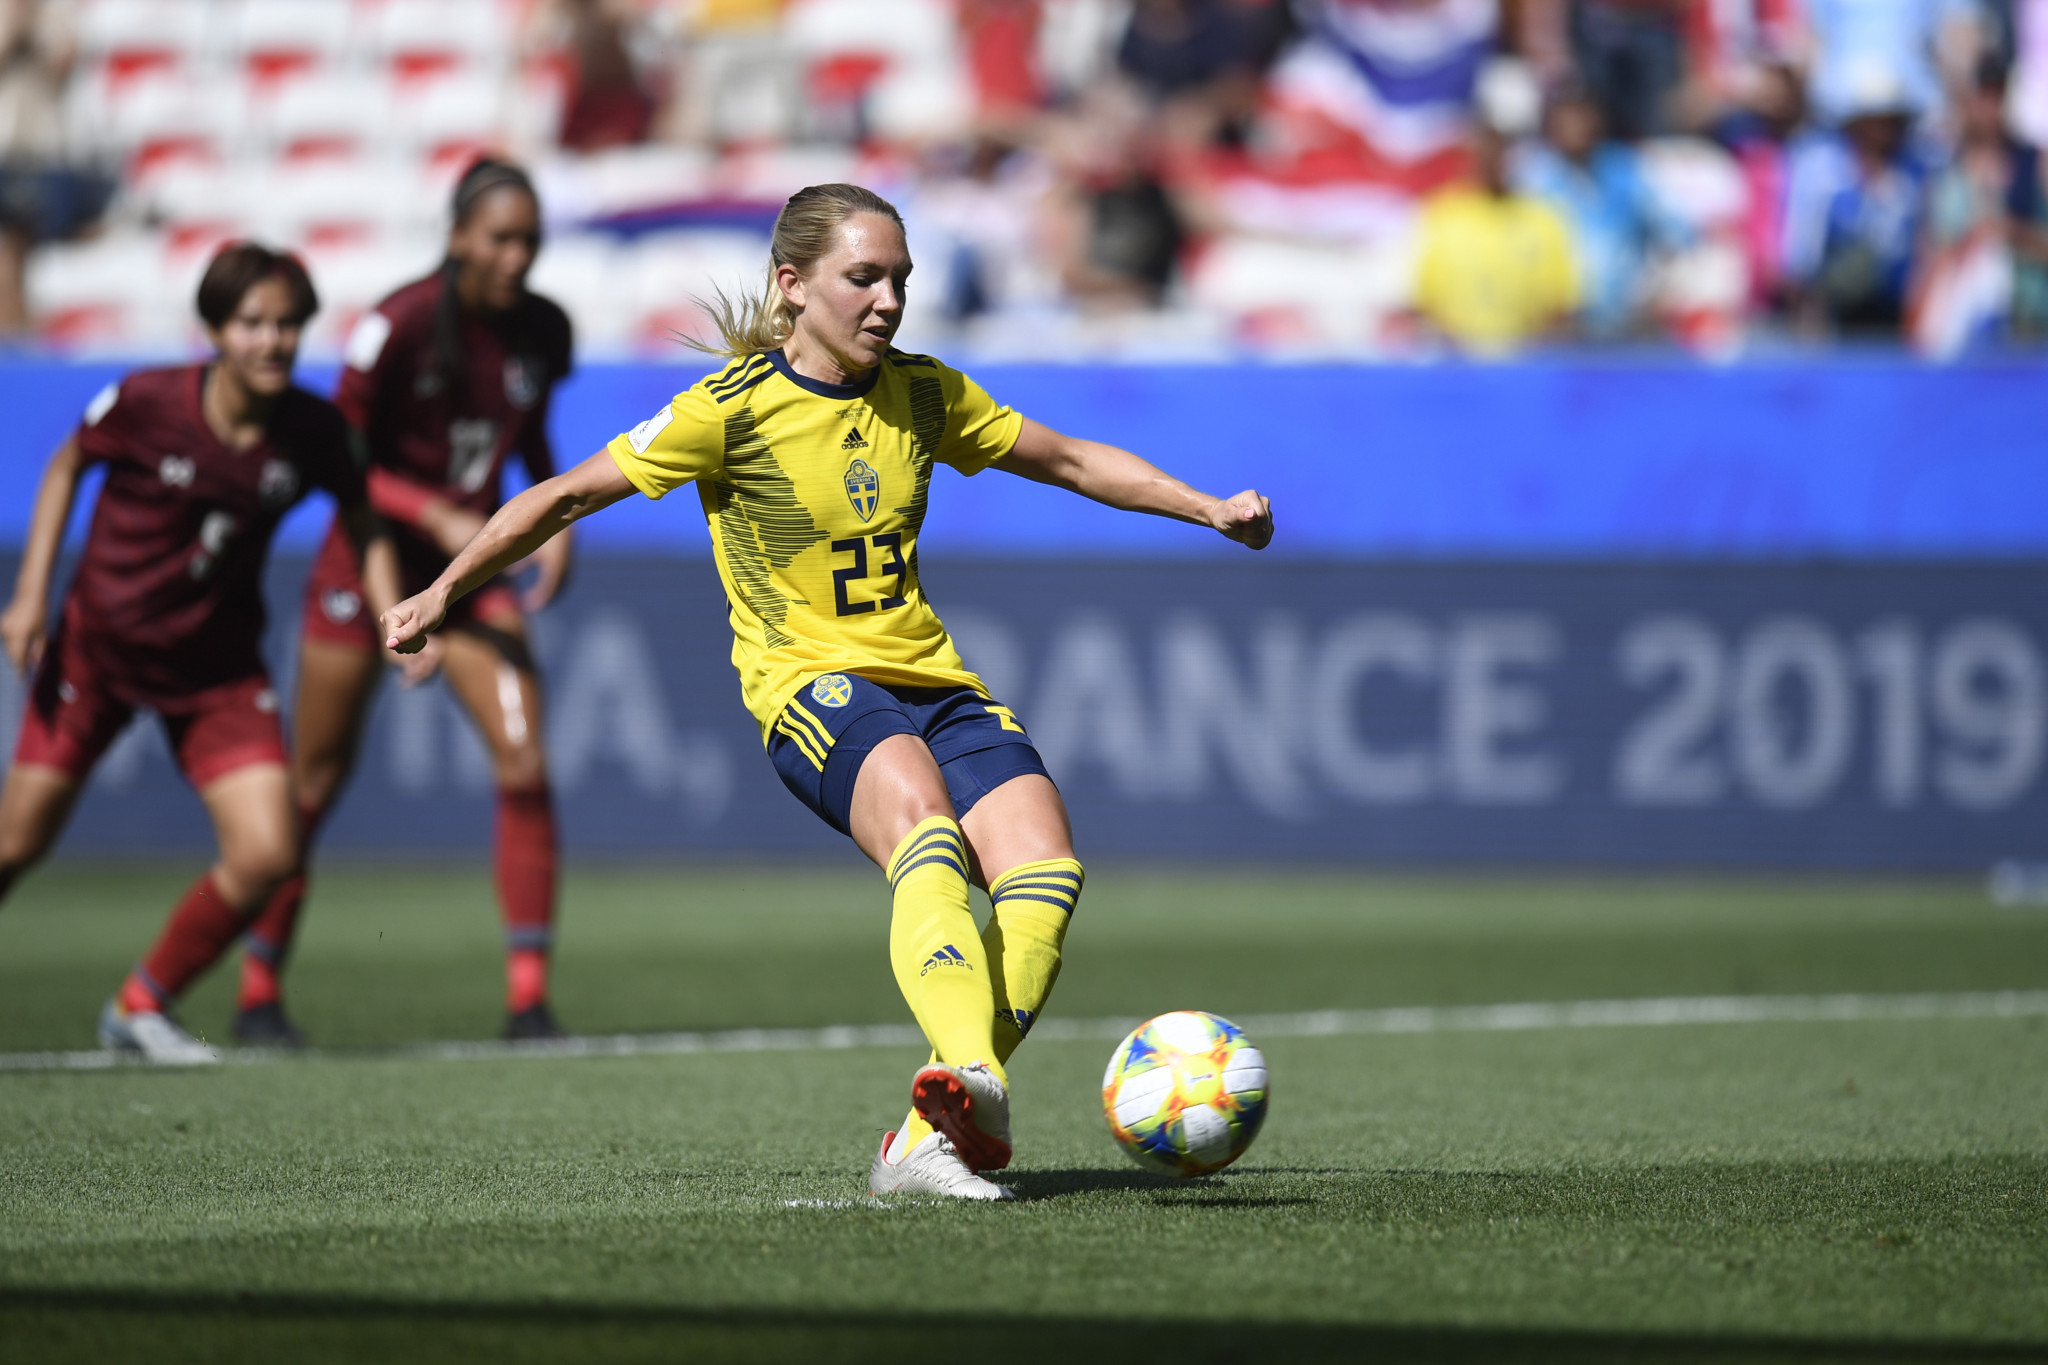 Goals galore in Group F as Sweden and United States show their quality